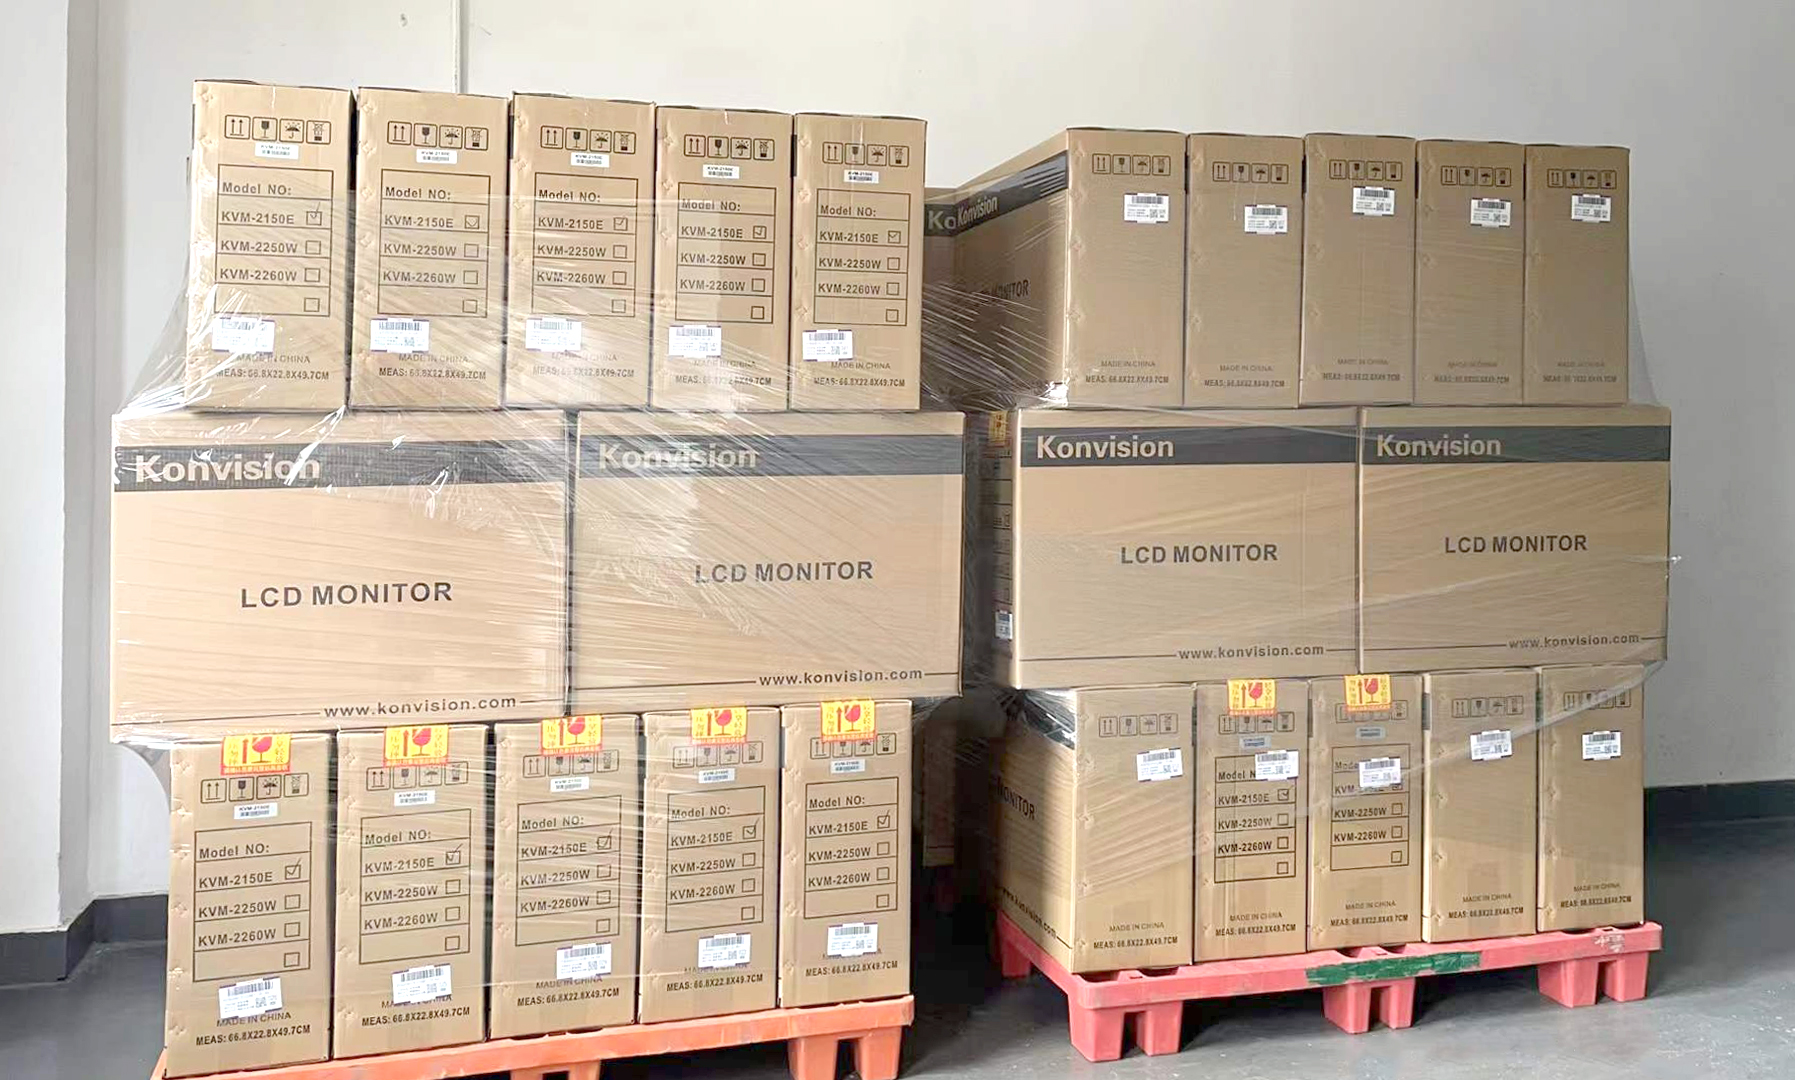 70 pcs Konvision monitors for the 2022 Beijing Winter Olympics were delivered to Beijing